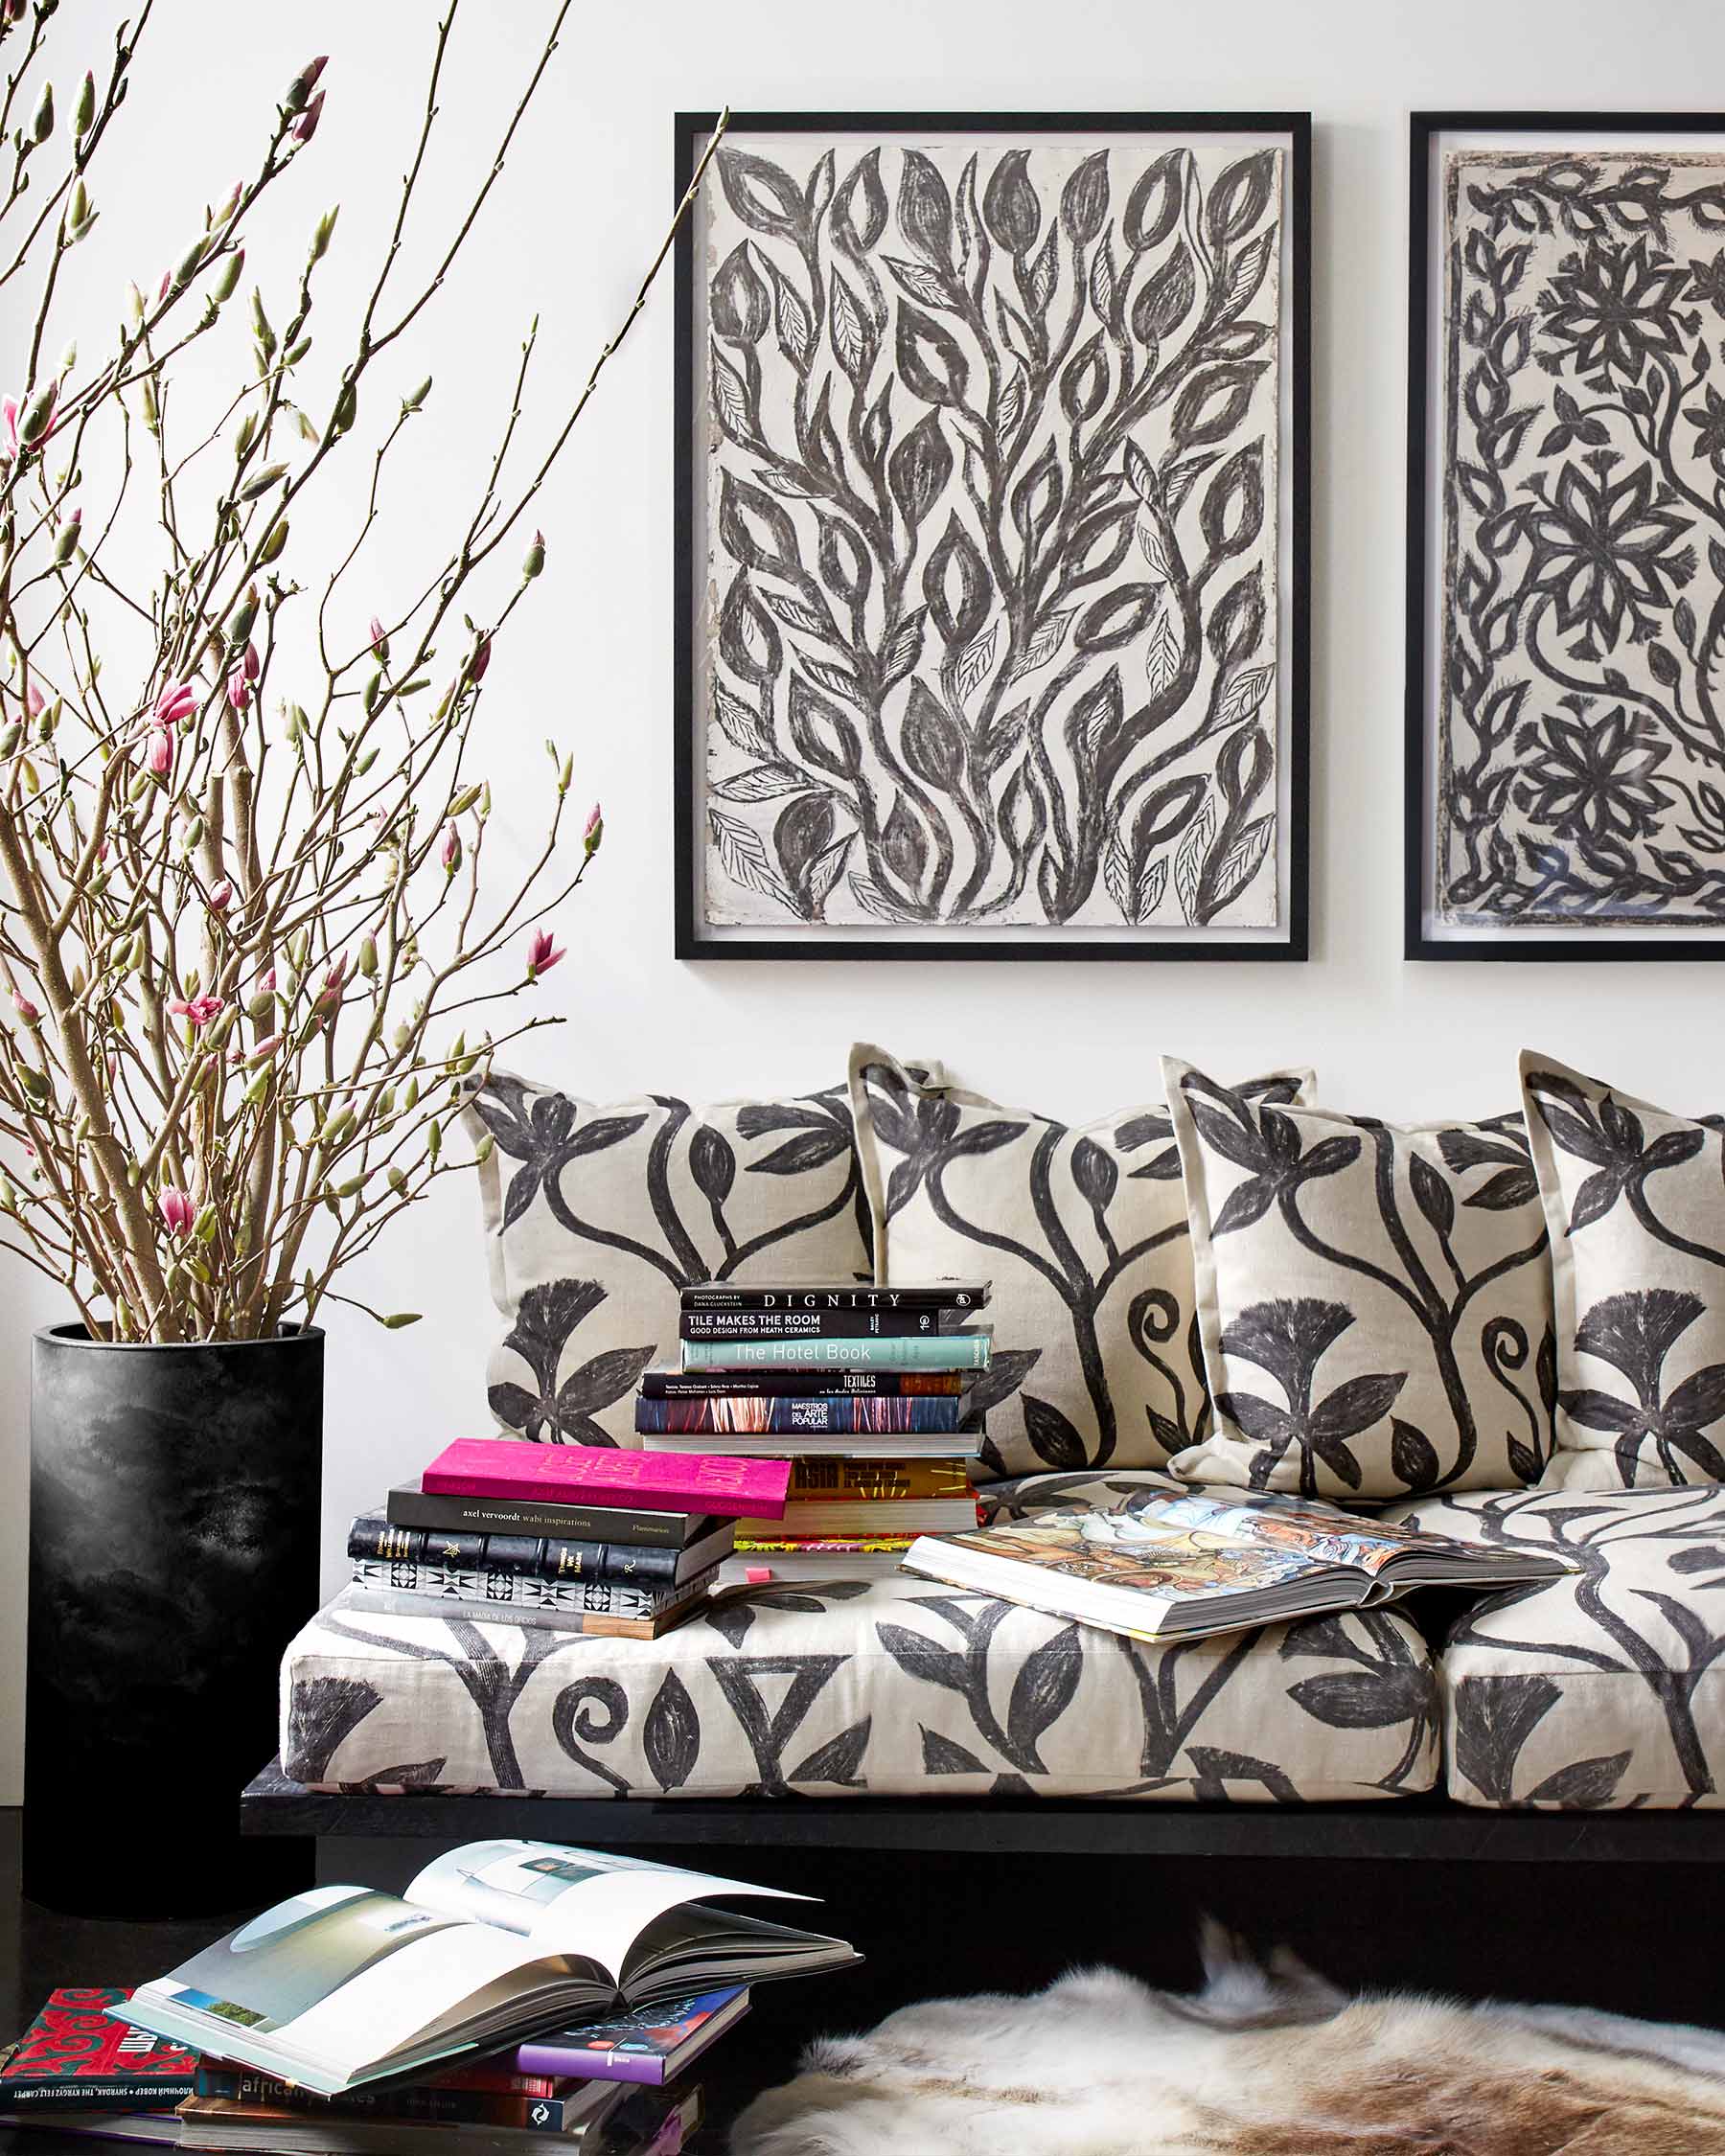 Khovar Vine fabric by the yard, upholstered couch in a graphic print.